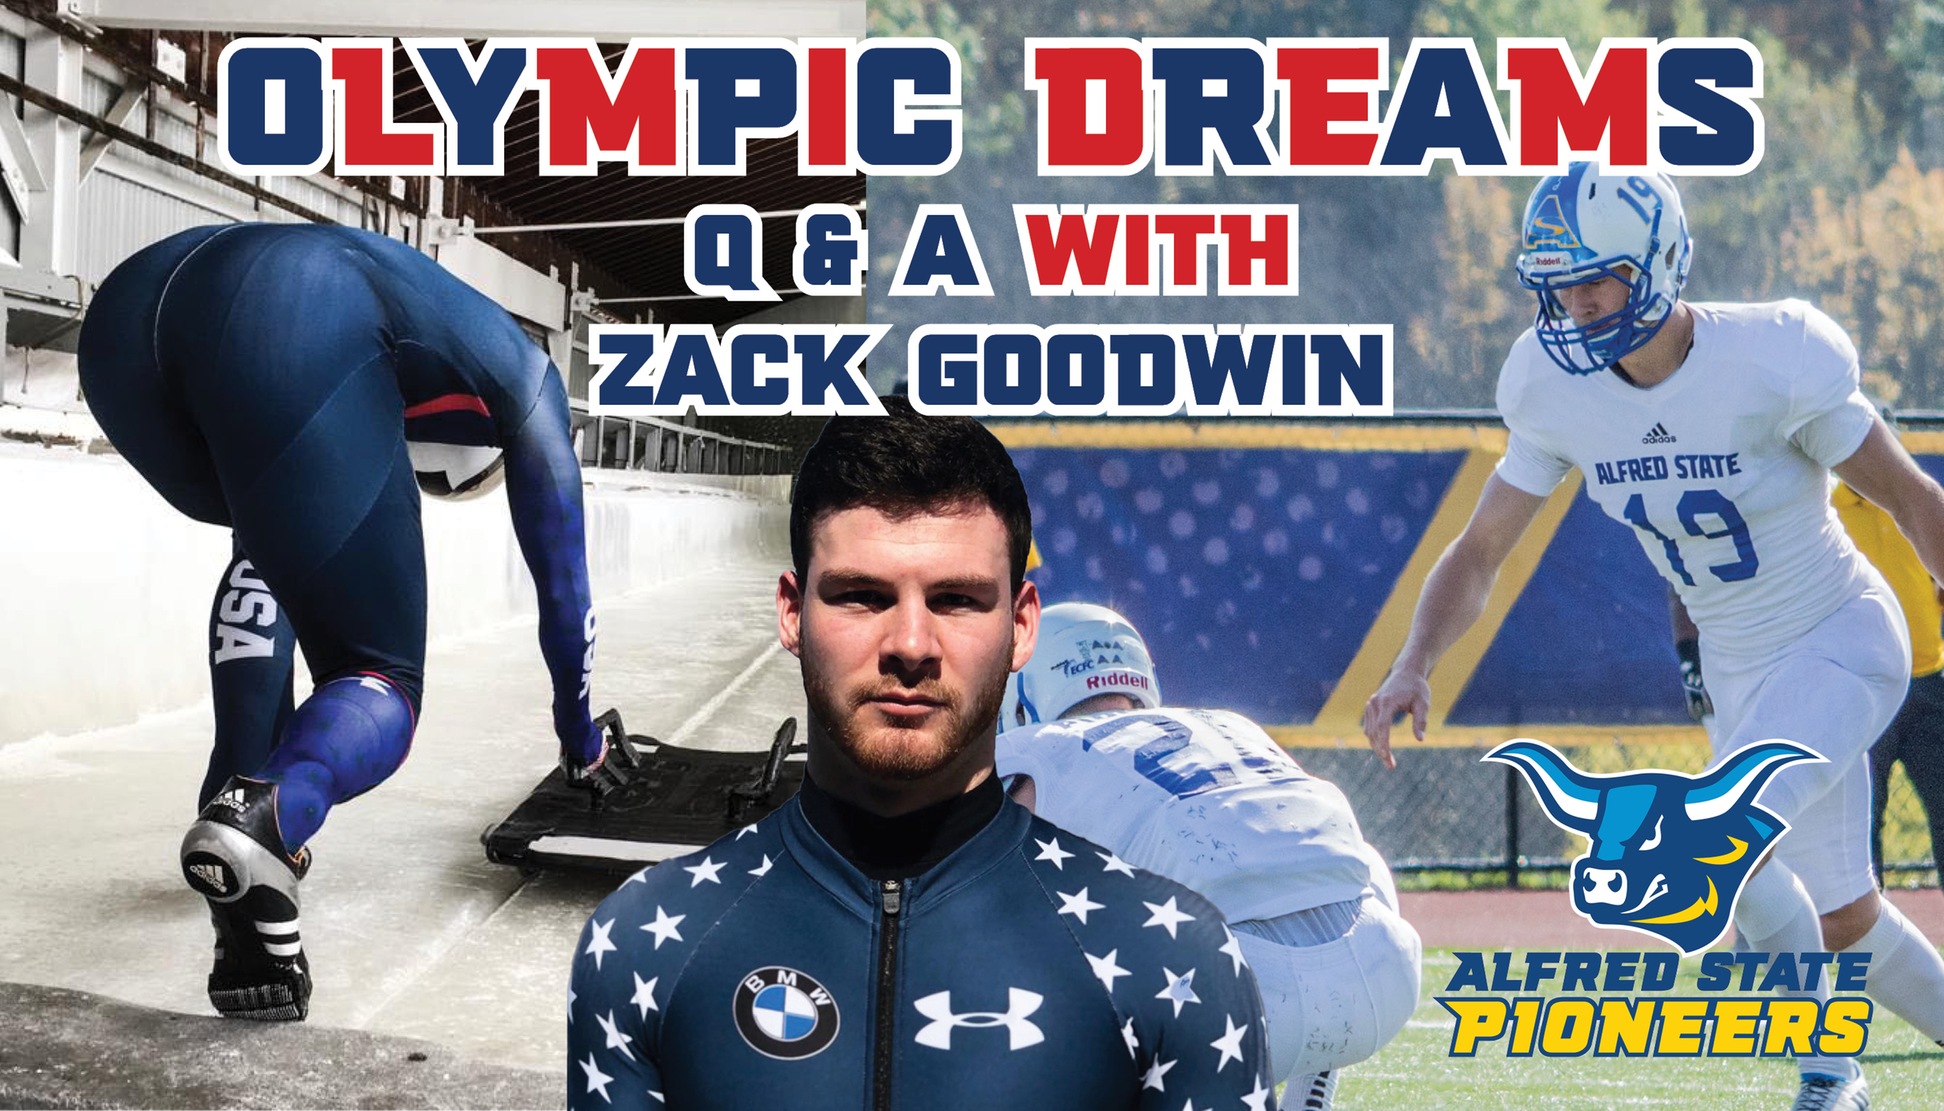 Zack Goodwin has turned his football passion to skeleton and a dream to make the Olympic team.